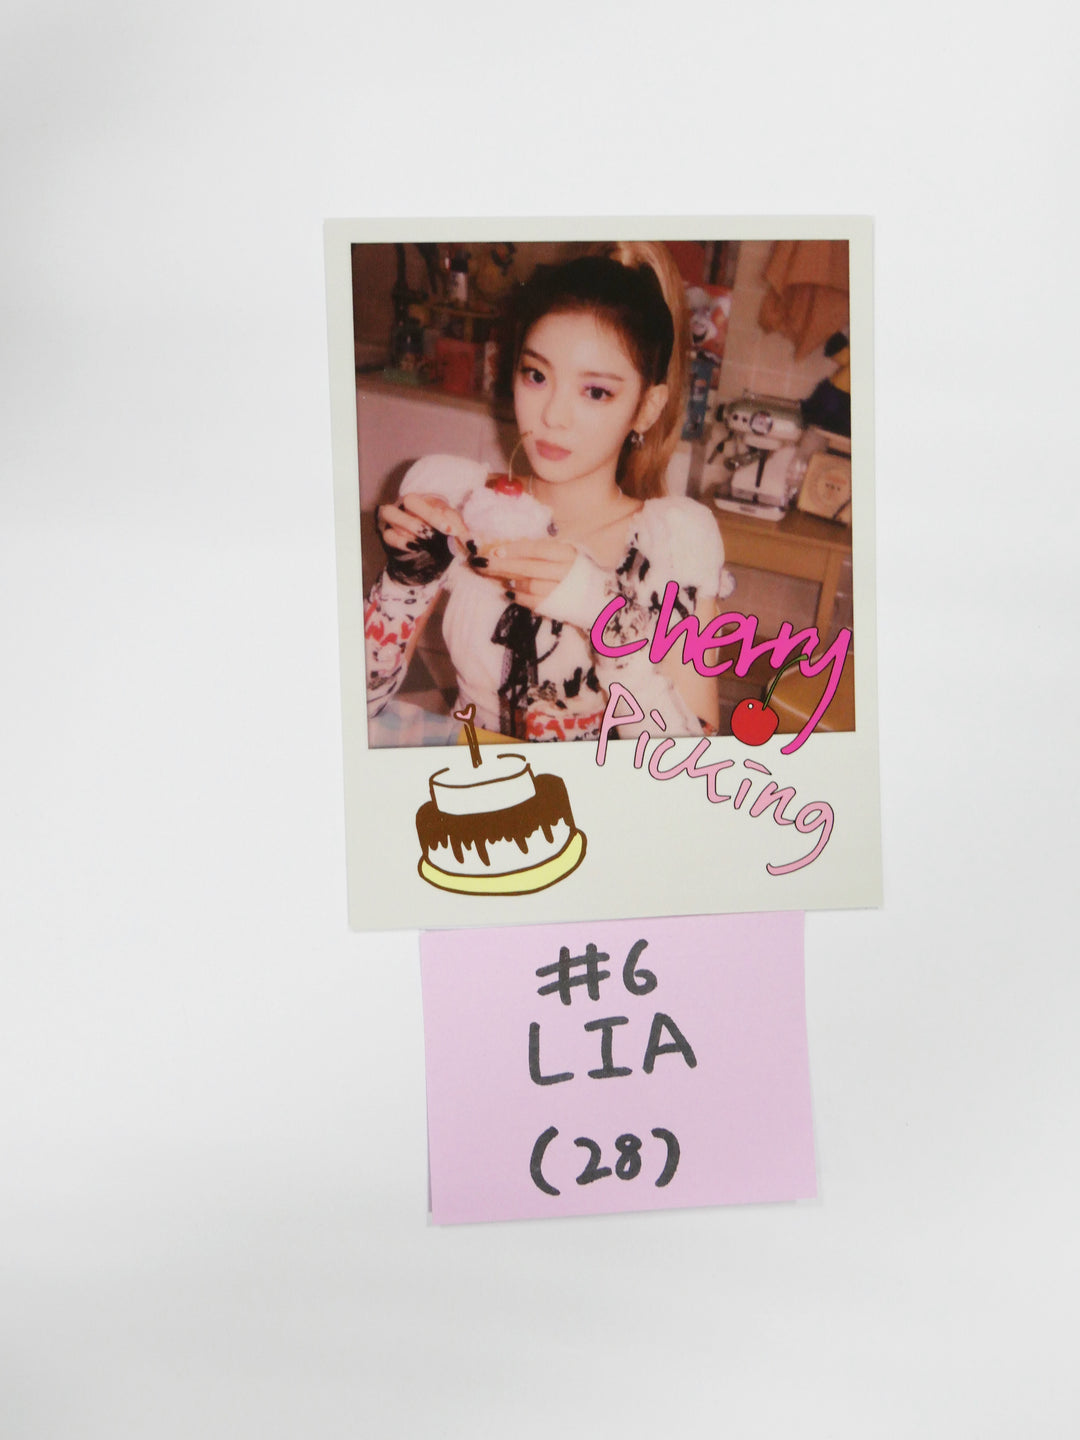 ITZY 'CRAZY IN LOVE' - Standing Card, Polaroid Photocard [Updated 11/19]